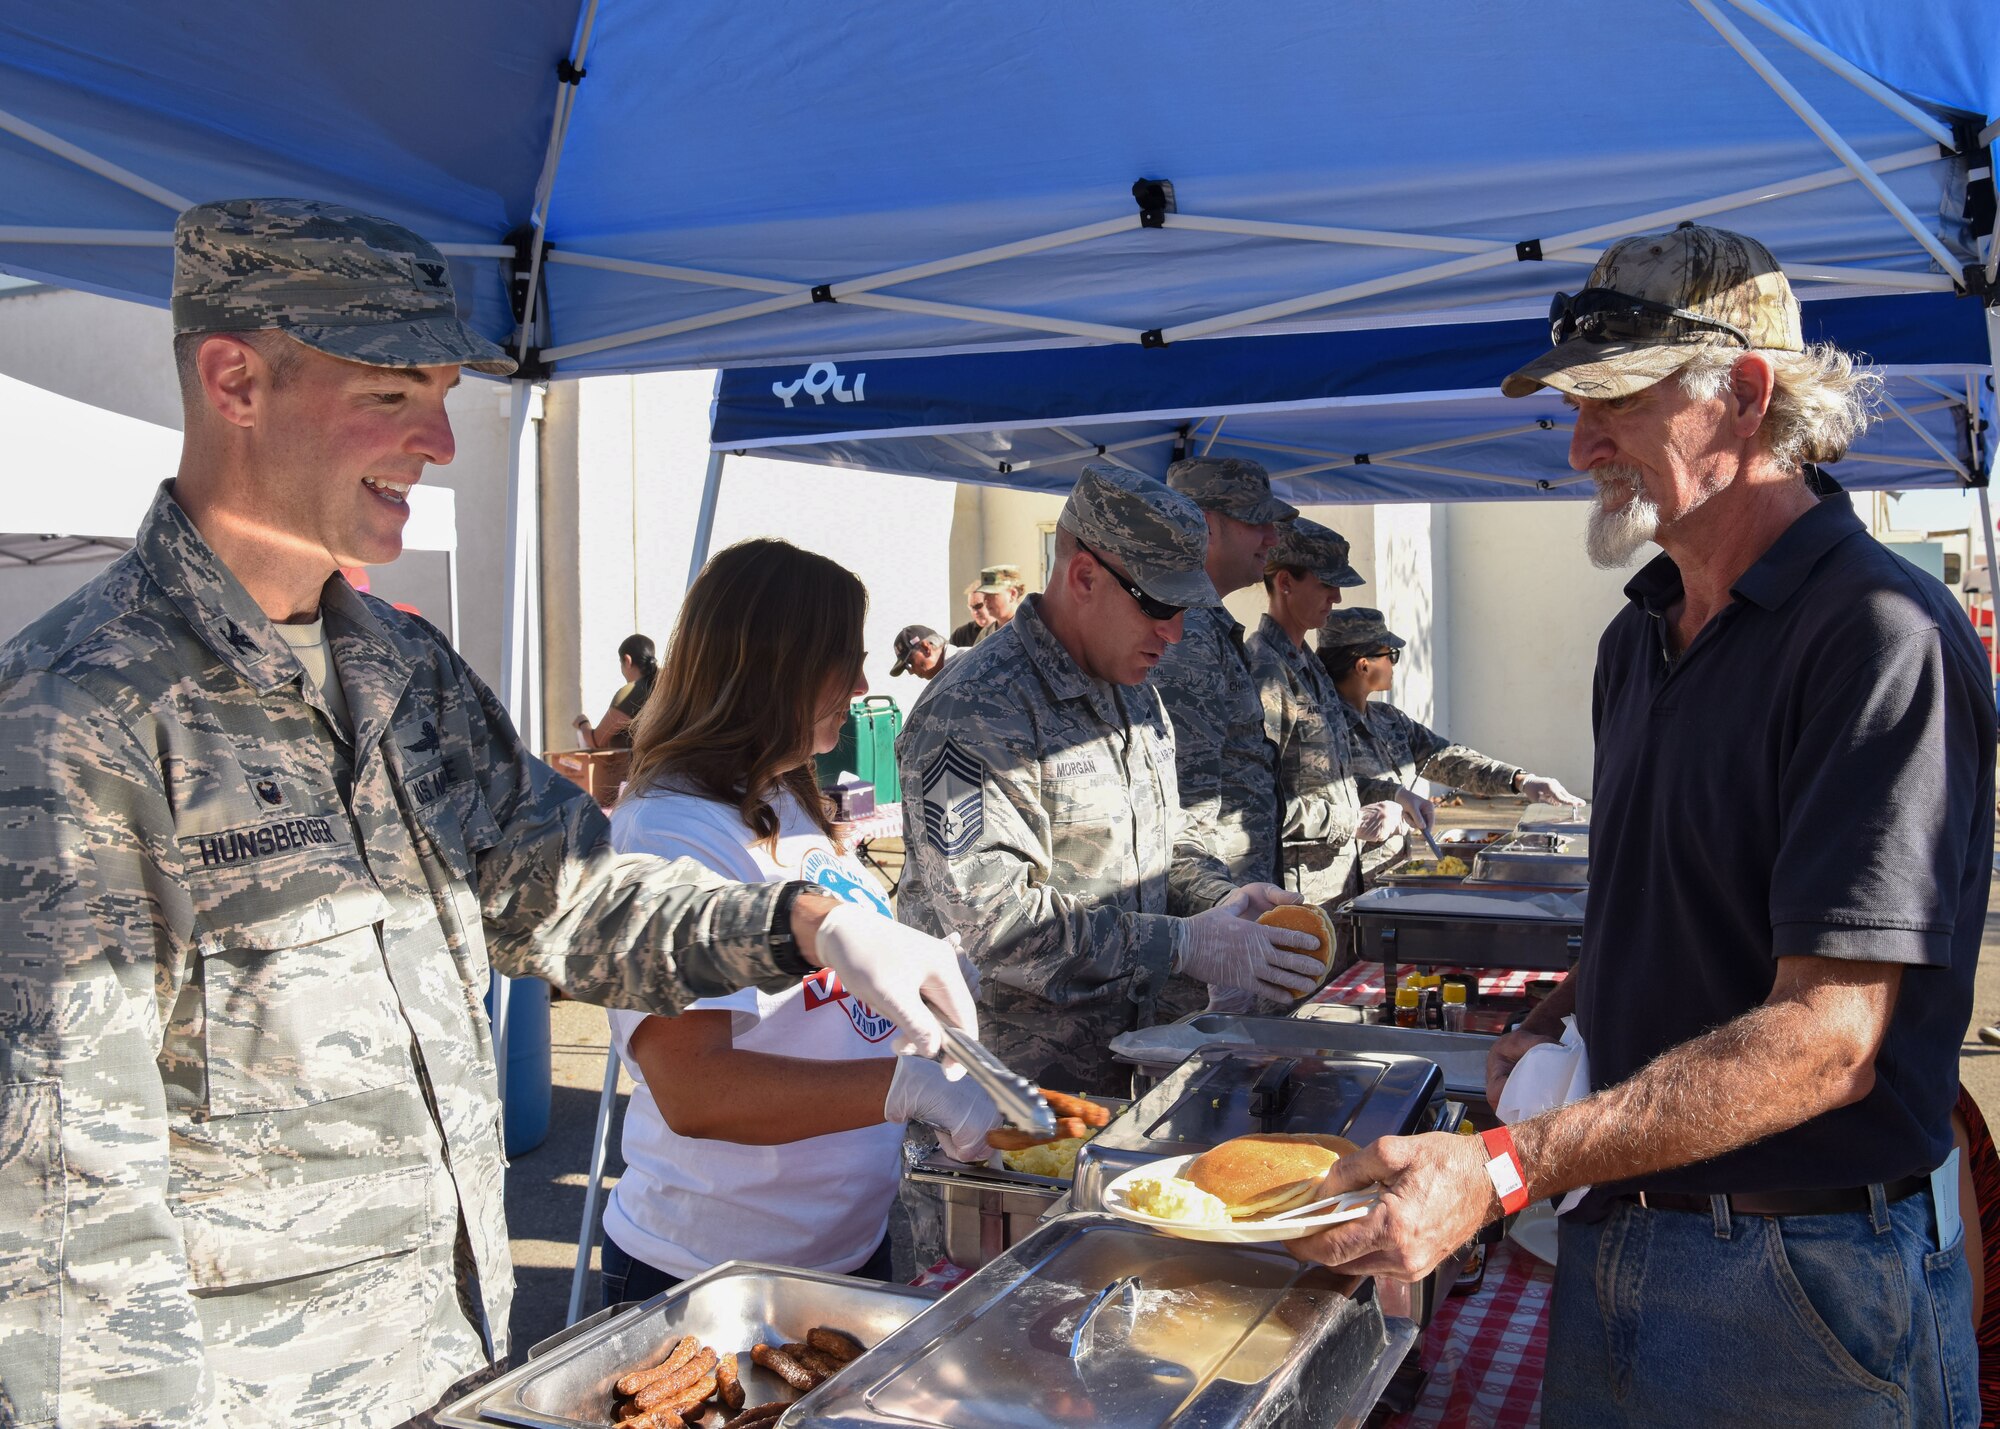 Col. Michael Hunsberger, 30th Mission Support Group commander, serves breakfast to a local veteran at the Veteran Stand Down event, Oct. 20, 2018 at Santa Maria Fair Grounds, Calif. There were two free meals for all who came to the Stand Down event, as well as free clothing, supplies and services provided.